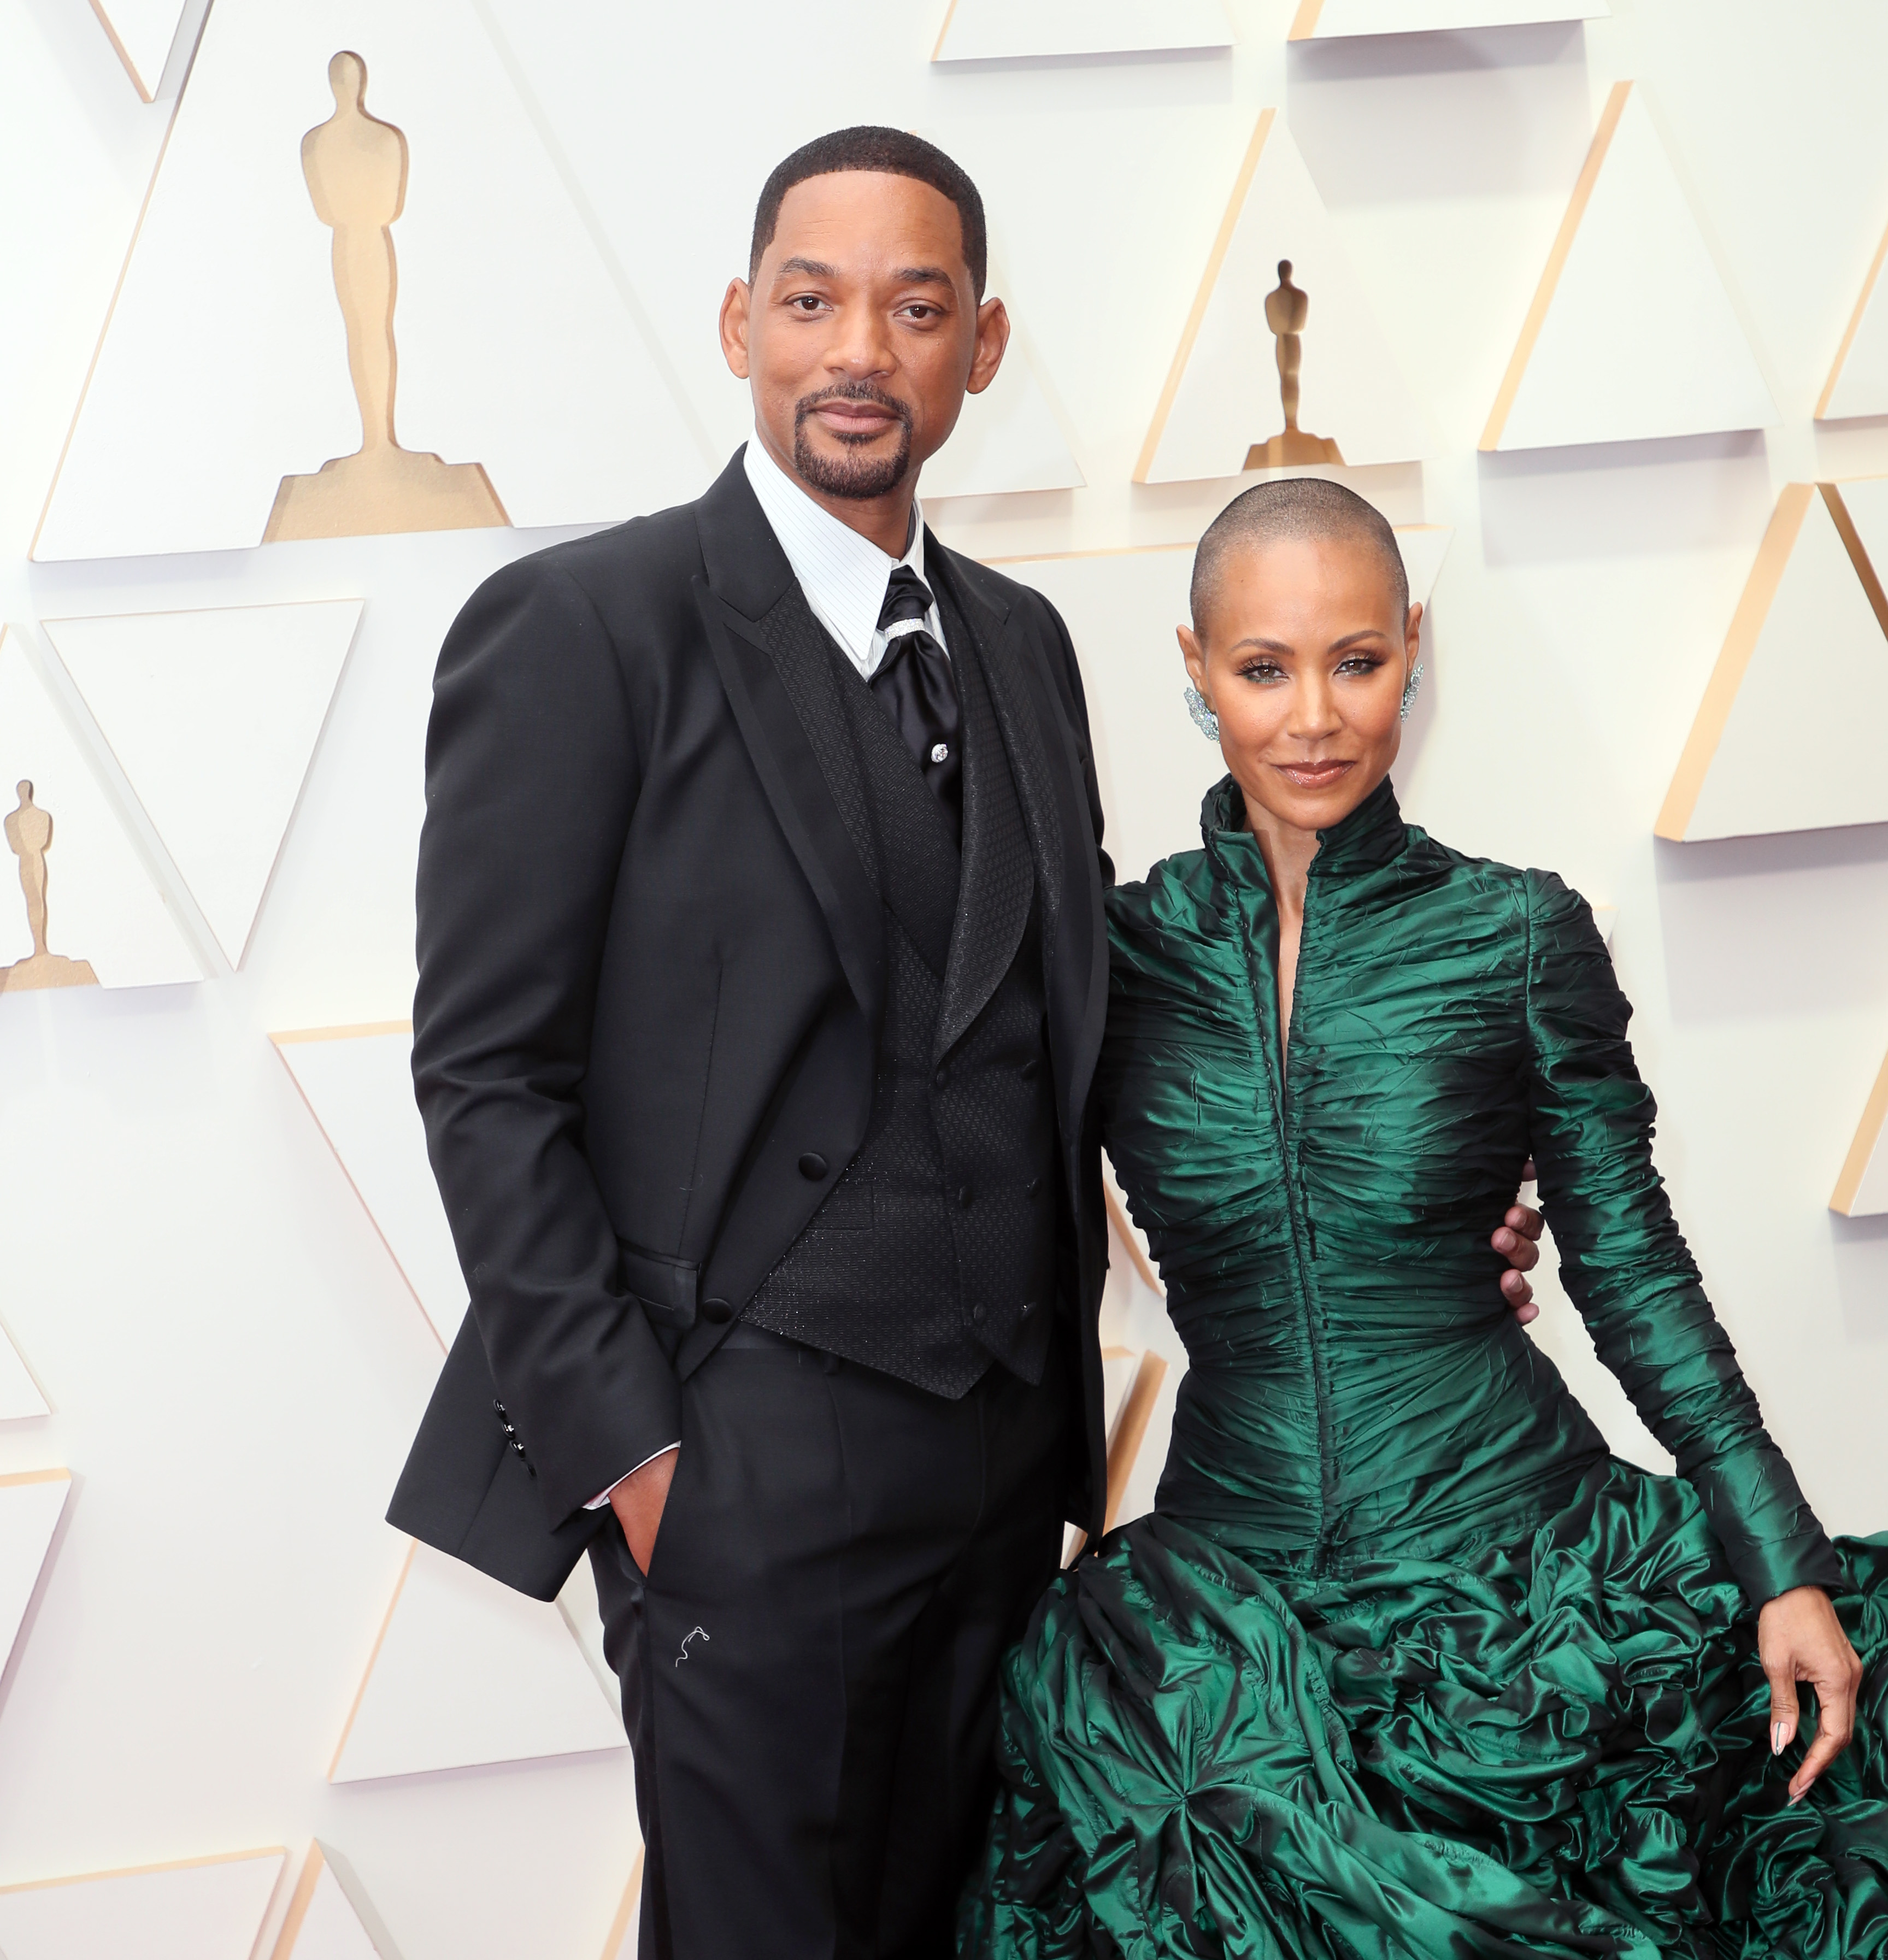 Will Smith and Jada Pinkett Smith at the 94th Annual Academy Awards in Hollywood, California on March 27, 2022. | Source: Getty Images